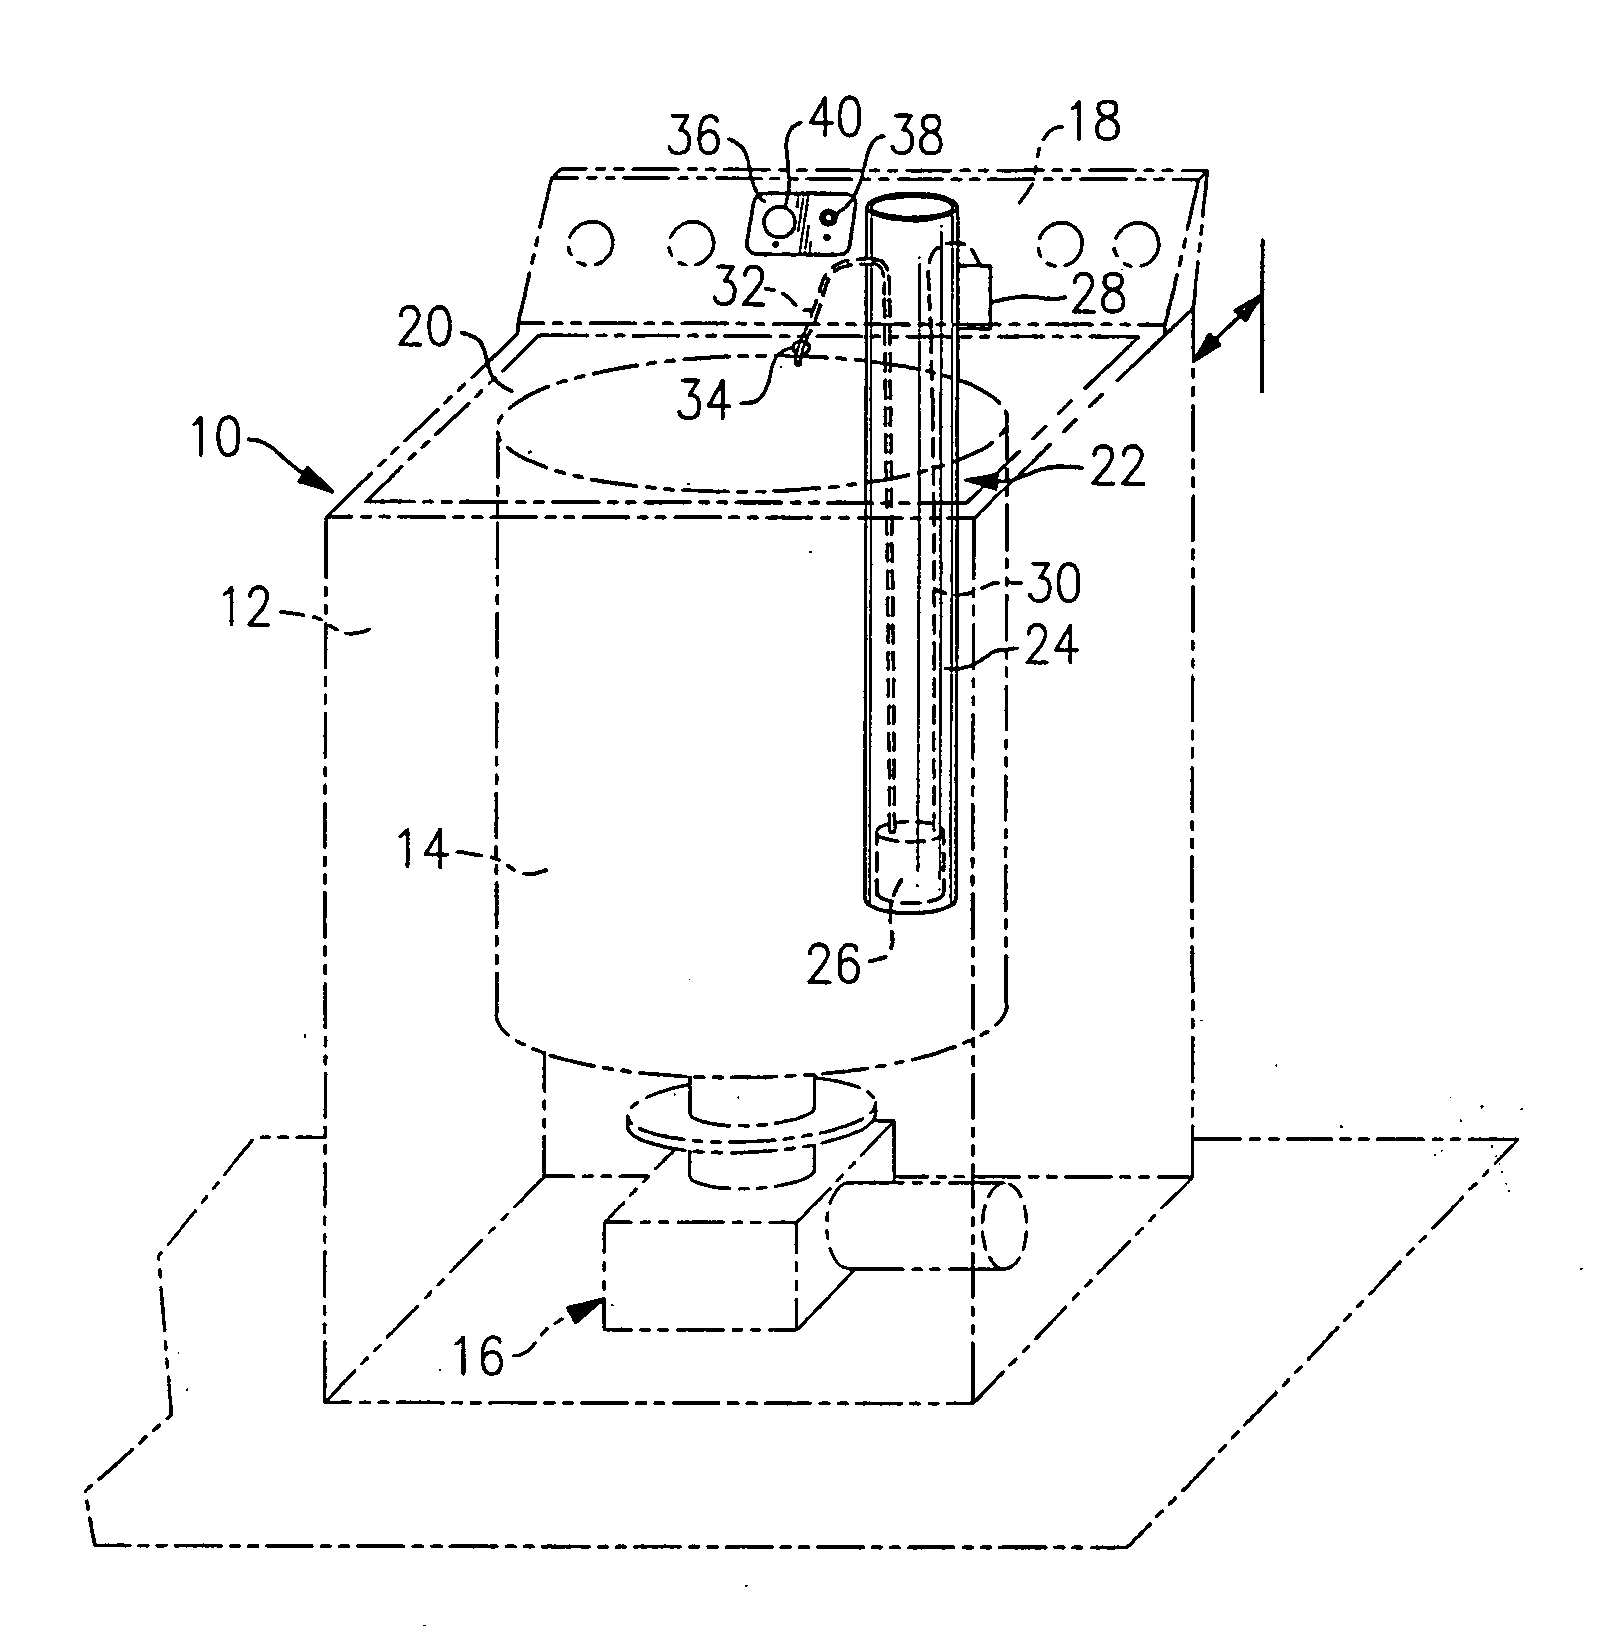 Liquid detergent dispensing system for automatic washer